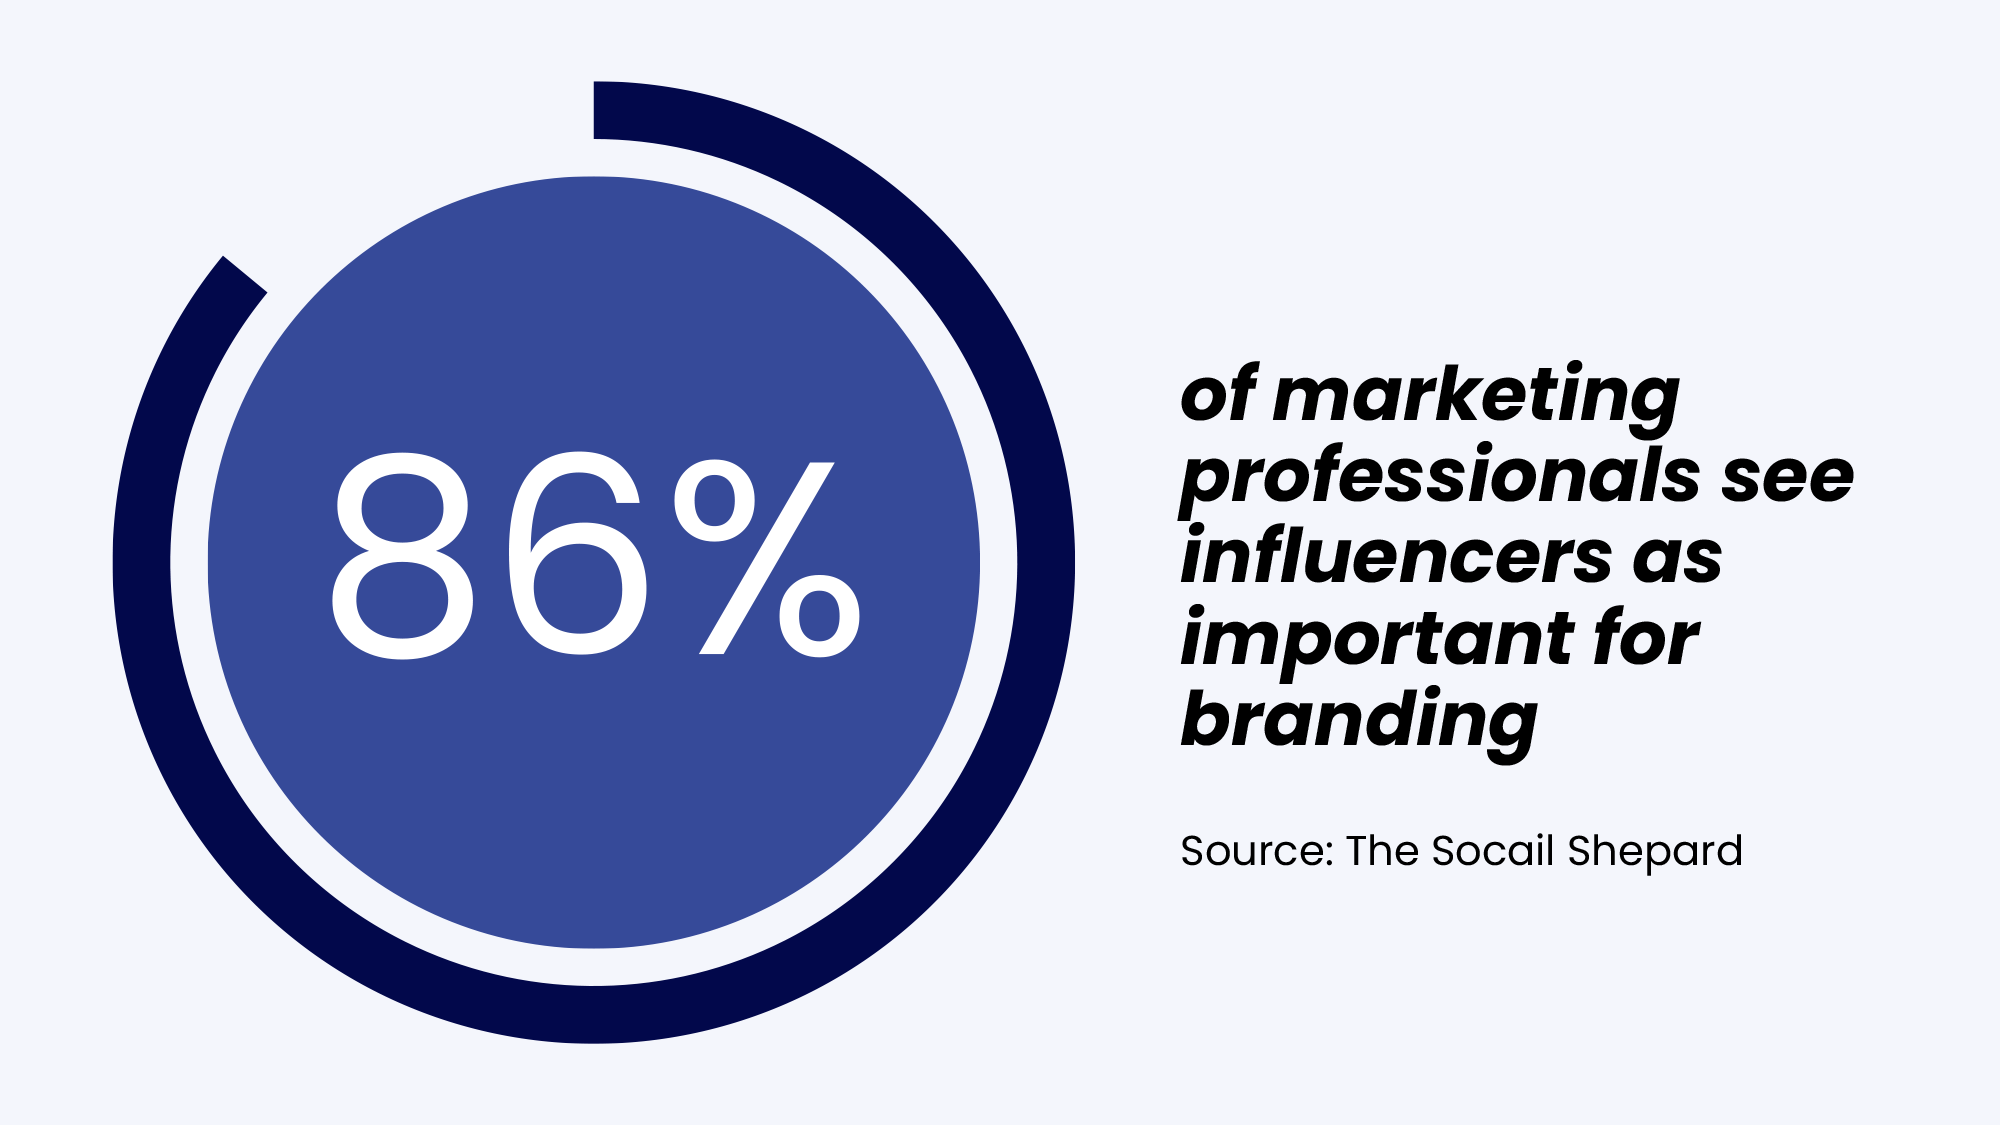 86% of marketing professionals see influencers as important for branding